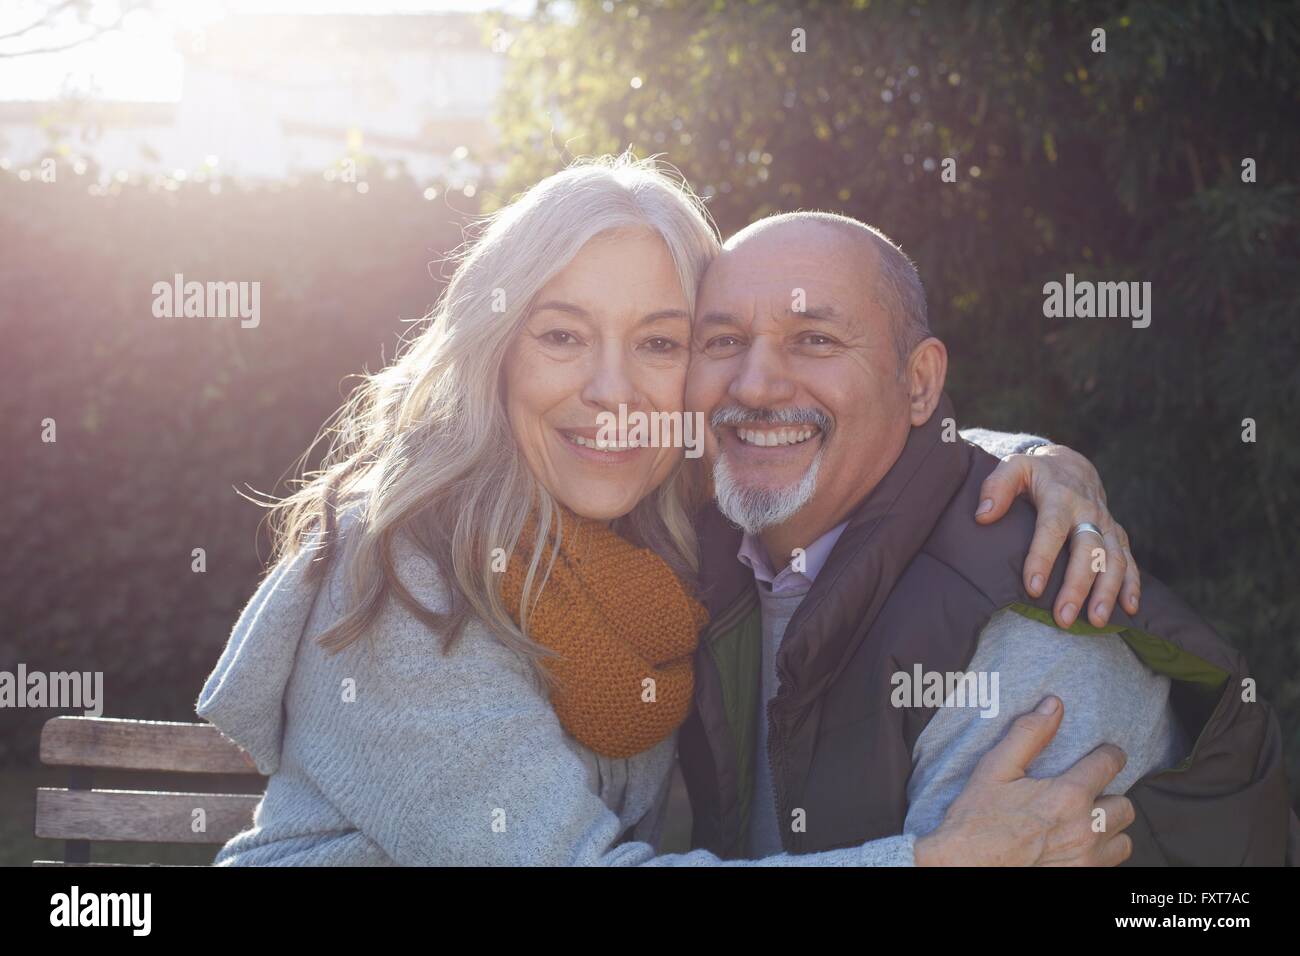 Mature couple hugging, smiling at camera Banque D'Images